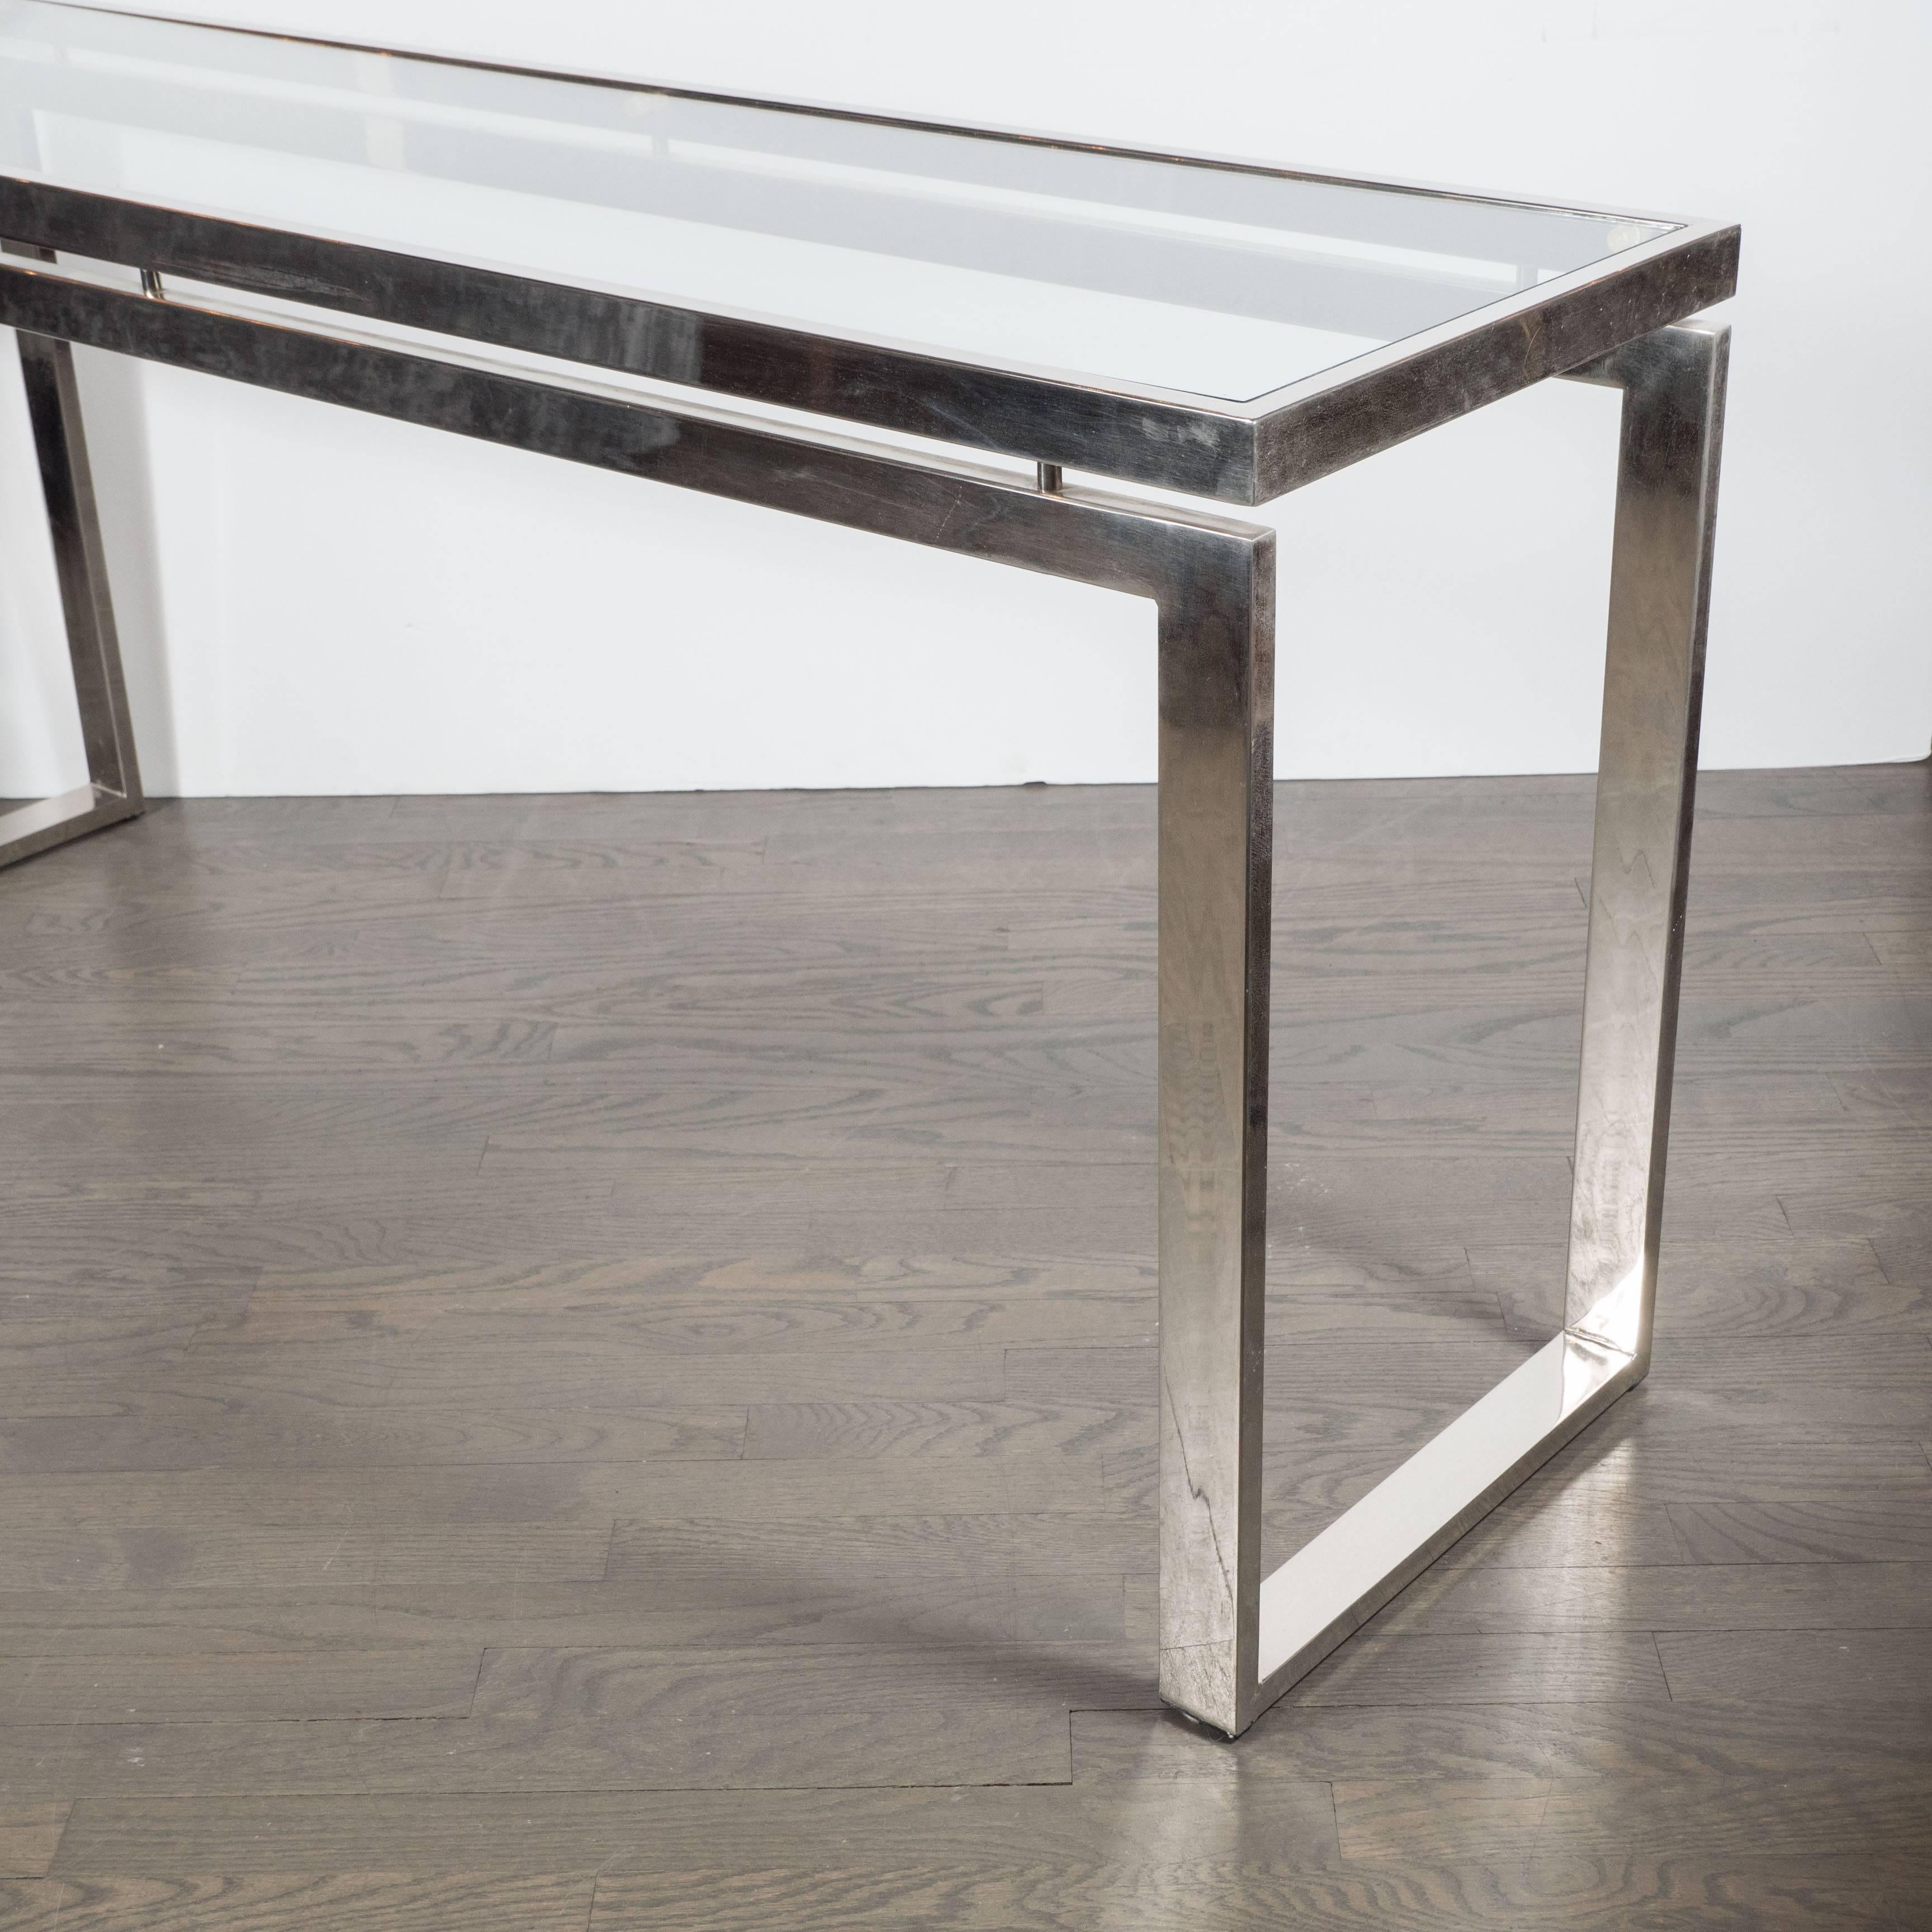 American Mid-Century Modernist Chrome and Glass Console or Sofa Table by Milo Baughman